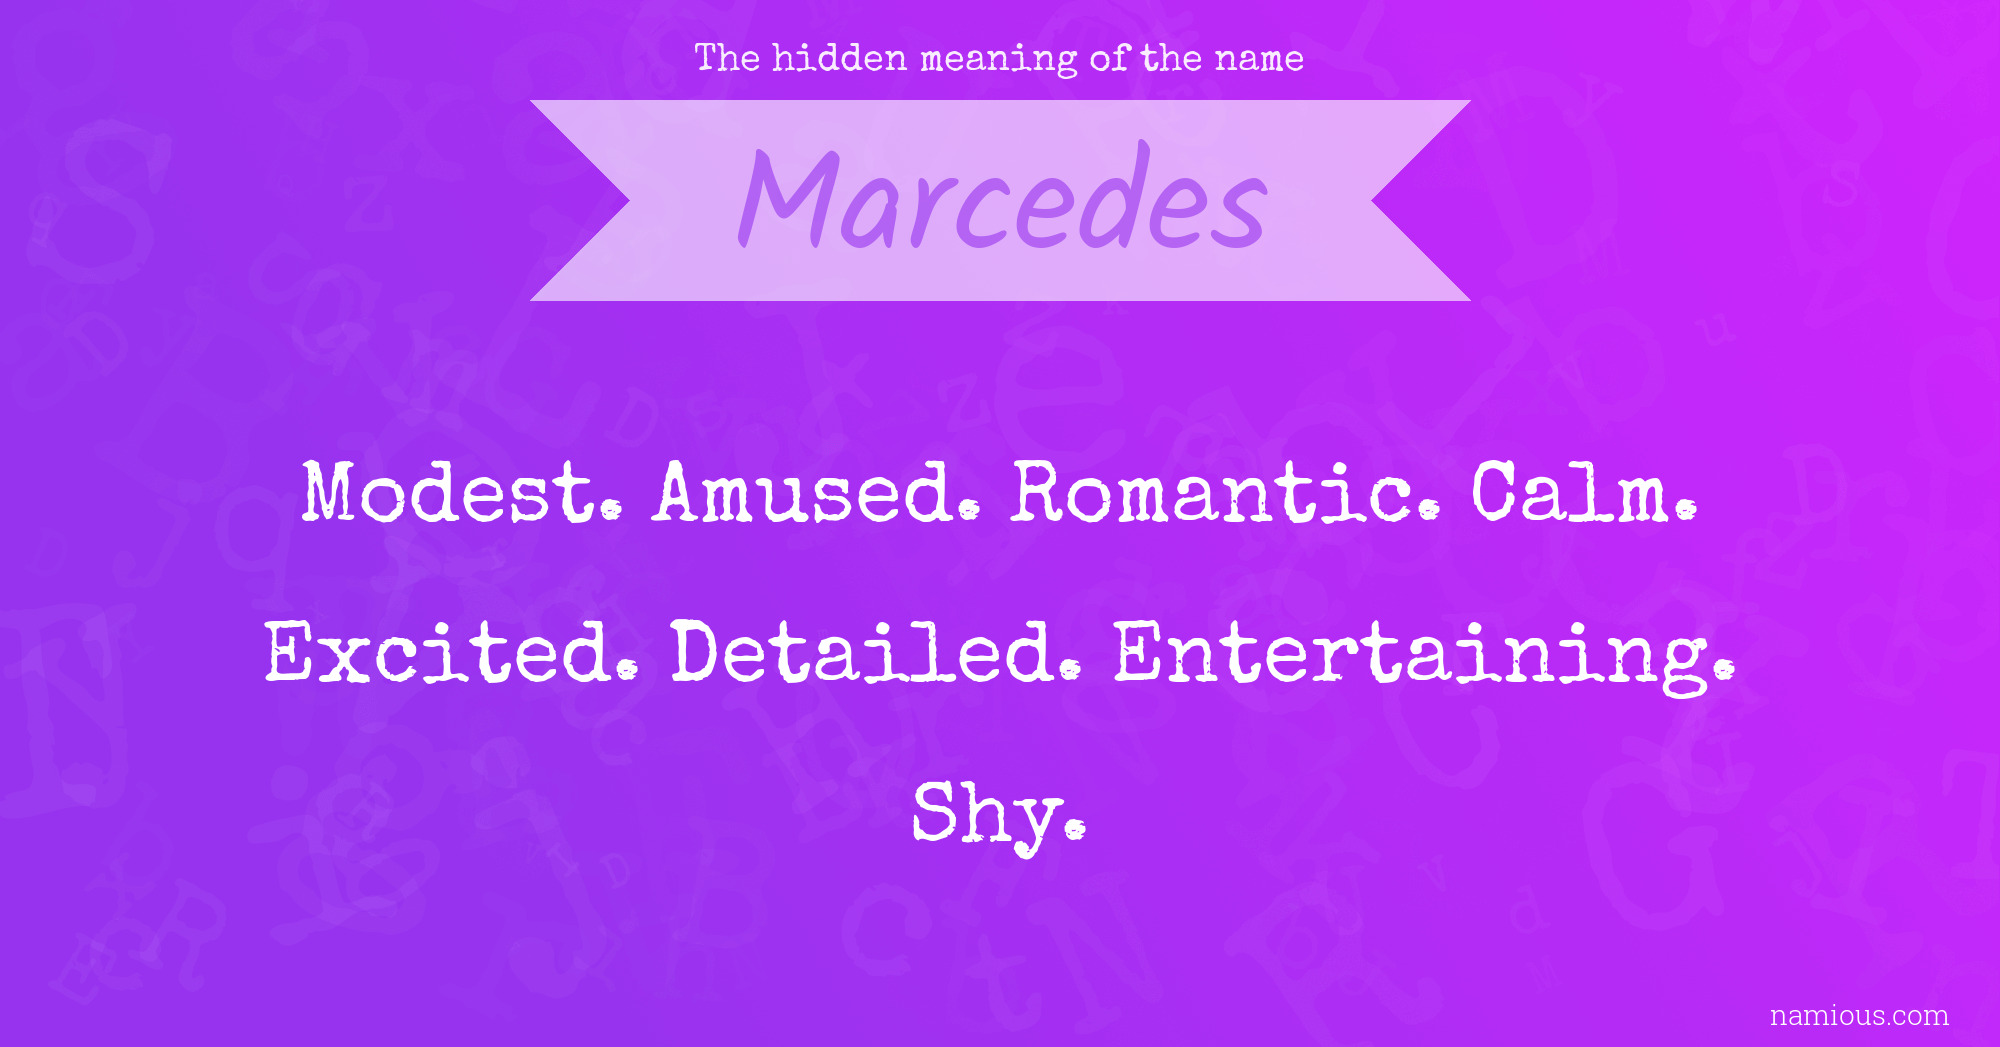 The hidden meaning of the name Marcedes